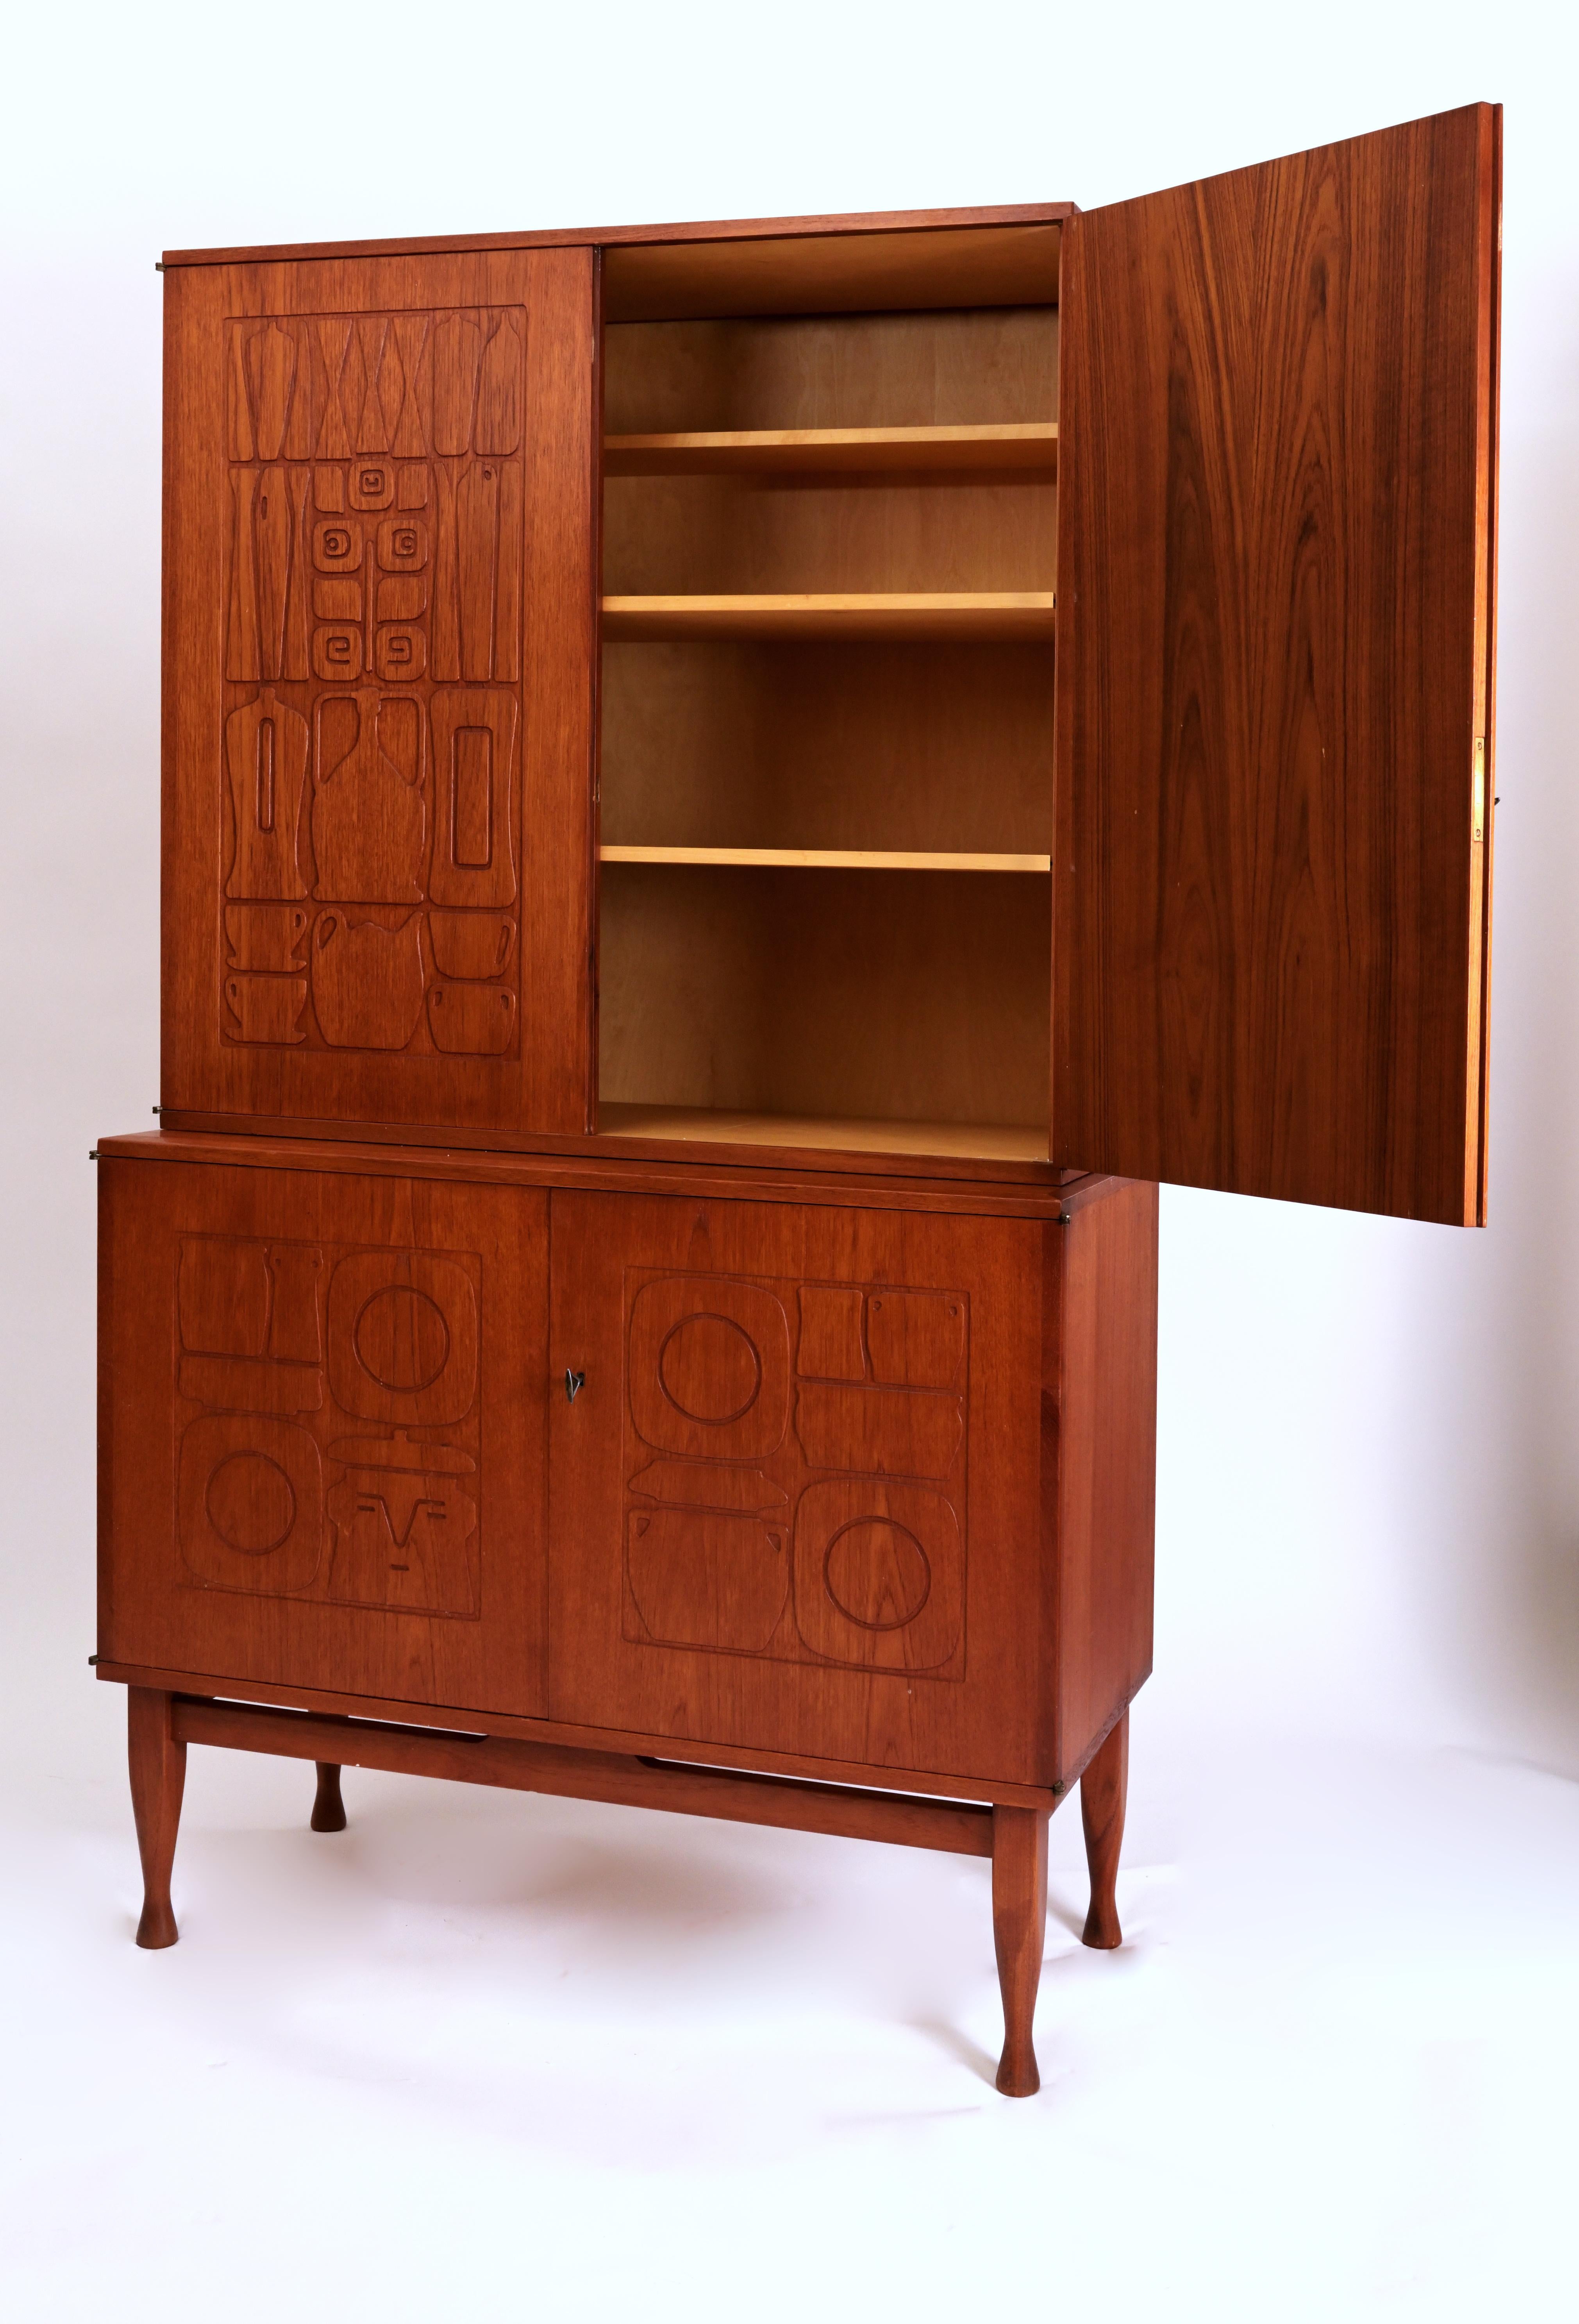 A 2 part teak cabinet by Swedish designer Yngve Ekstrom (1913-1988) for Westbergs Furniture. The two park teak cabinet features doors with hand carved decorations of jars, bottles and other playful designs. The interiors are fitted with adjustable